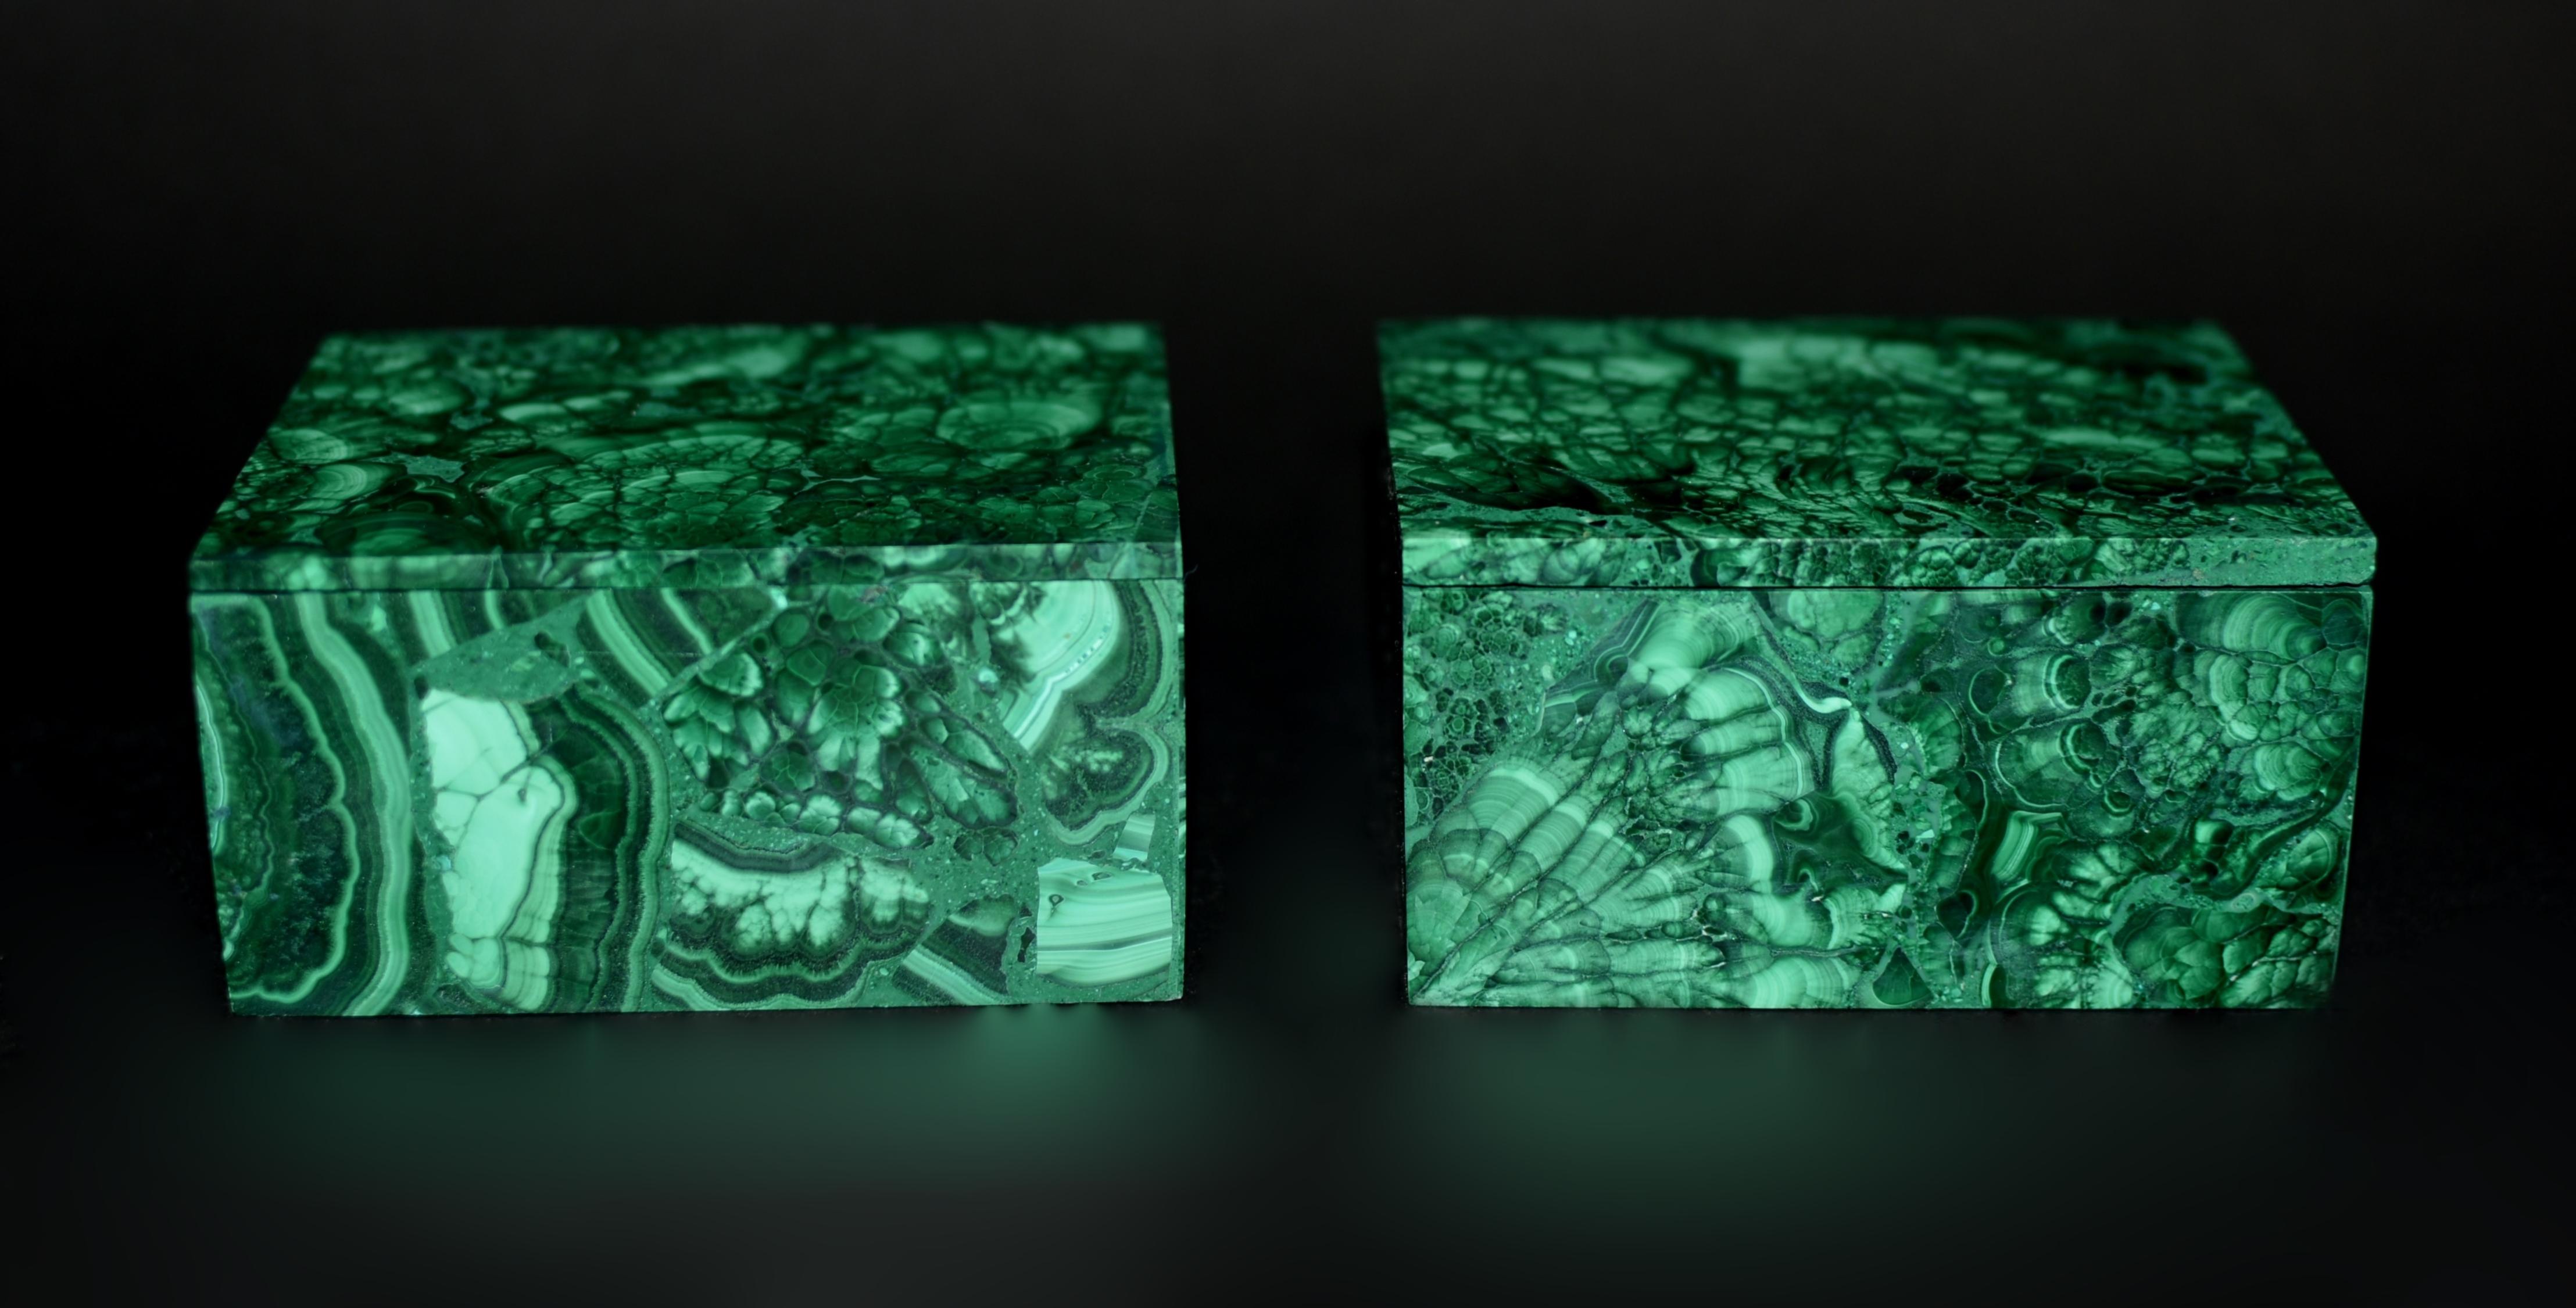 A pair of stunning grade AAA malachite boxes with a fantastic turkey tail pattern. Gemstone malachite ranges from light to dark green, with the highly sought after ones displaying concentric rings and swirls. This exceptional pair uses carefully